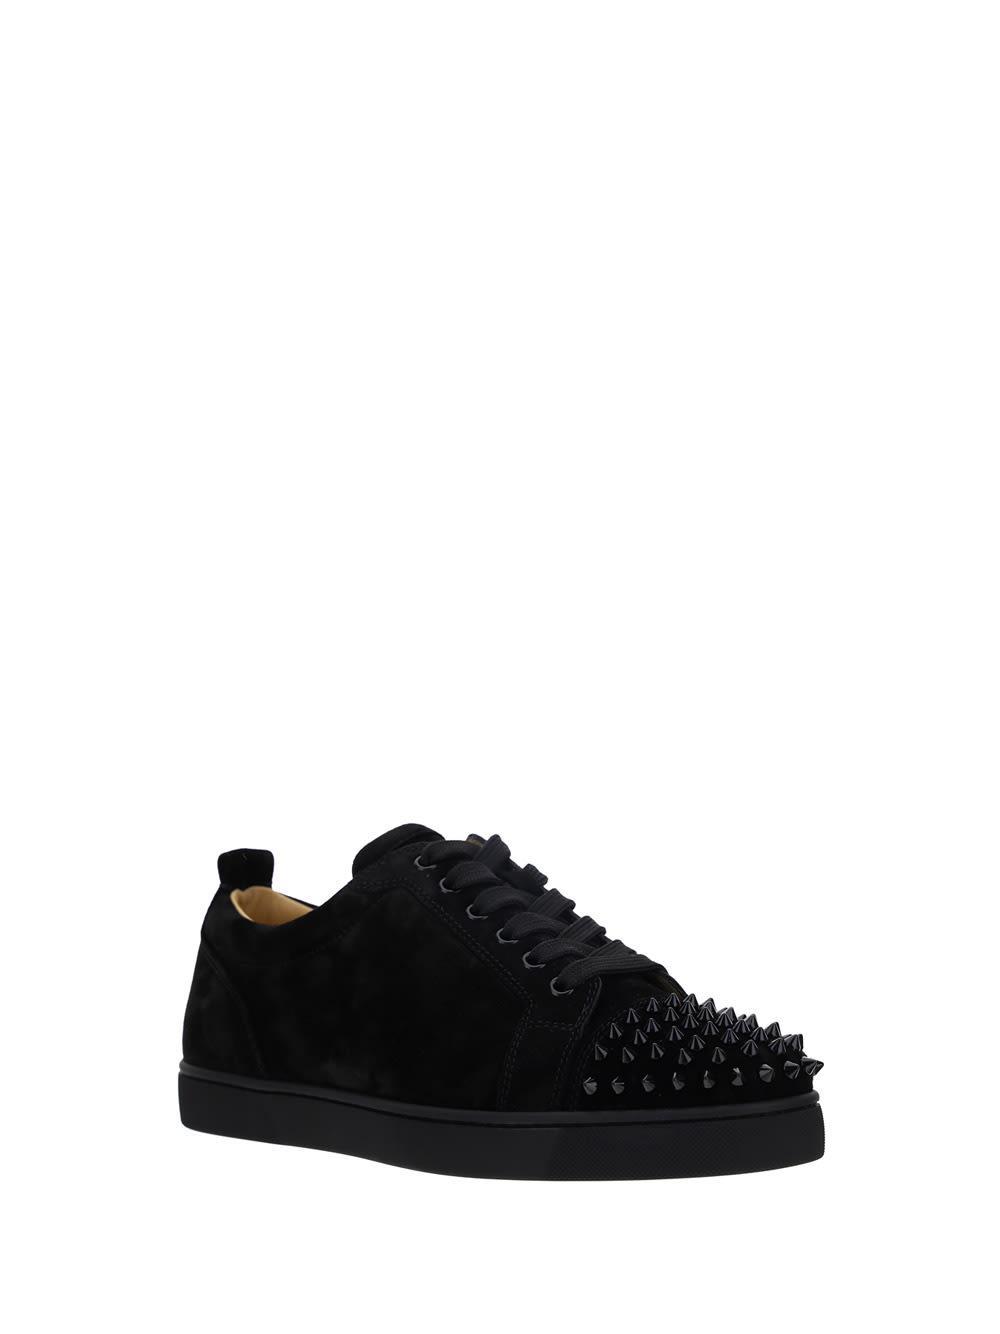 Christian Louboutin Lou Spikes Suede Sneakers in Black for Men